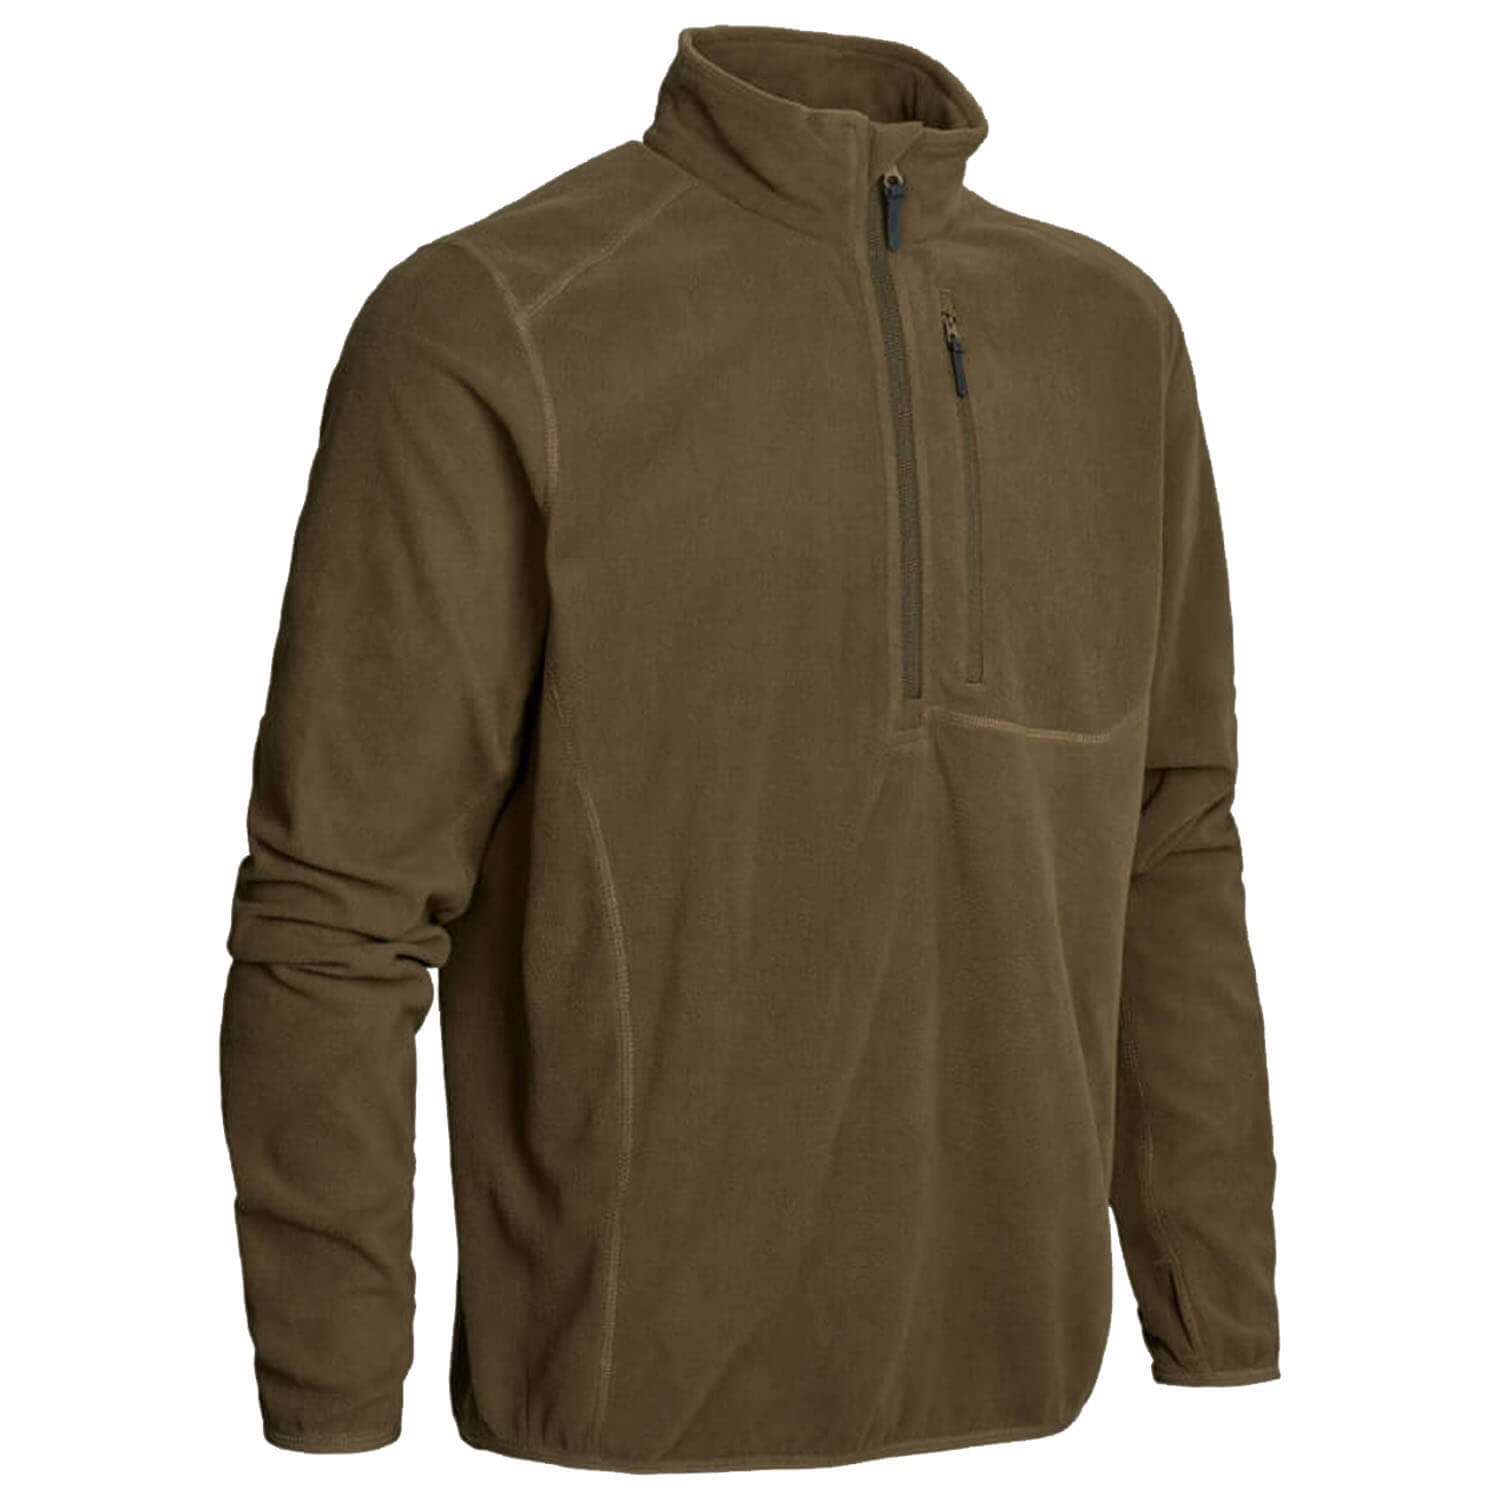 Northern Hunting fleece pullover Kettil 1000 - Sweaters & Jerseys